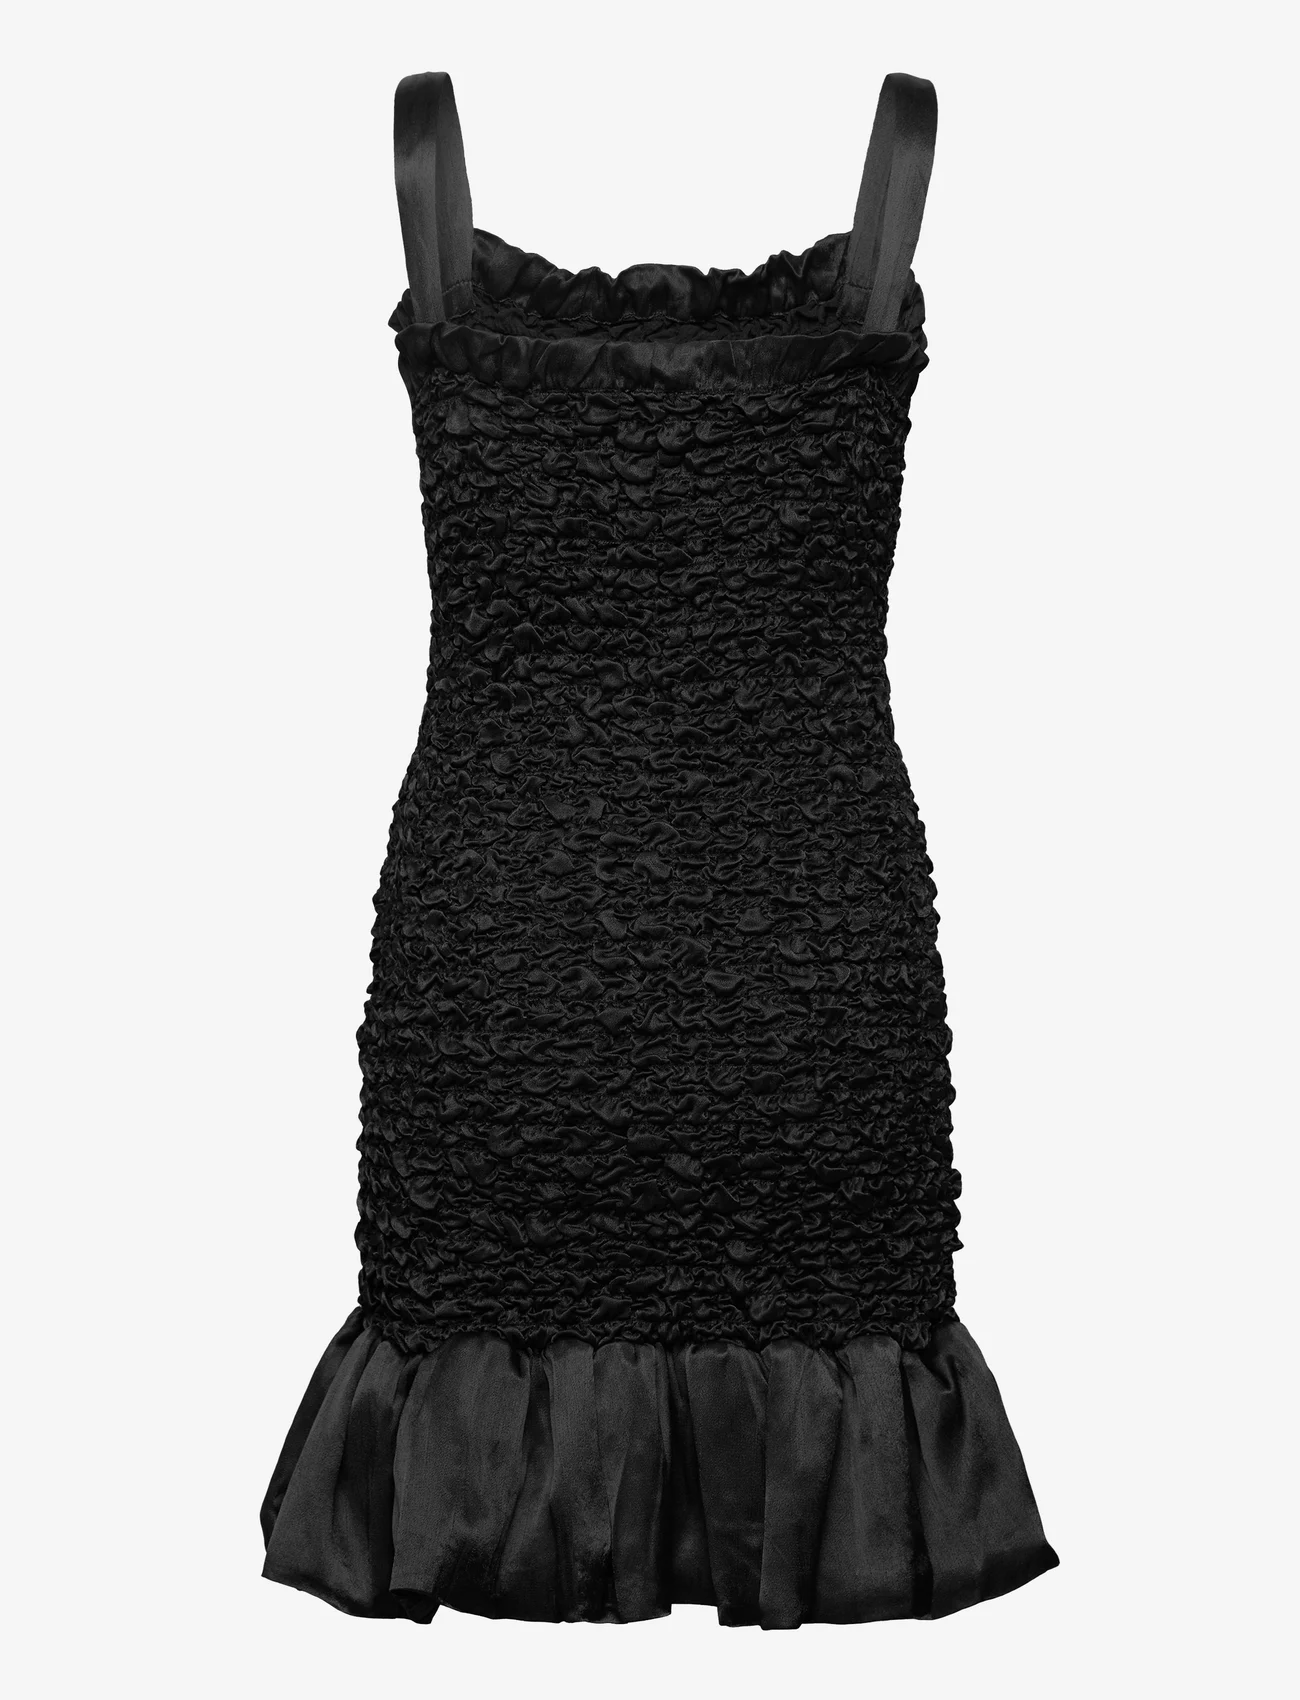 by Ti Mo - CrÈpe Satin Strap Dress - party wear at outlet prices - black - 1